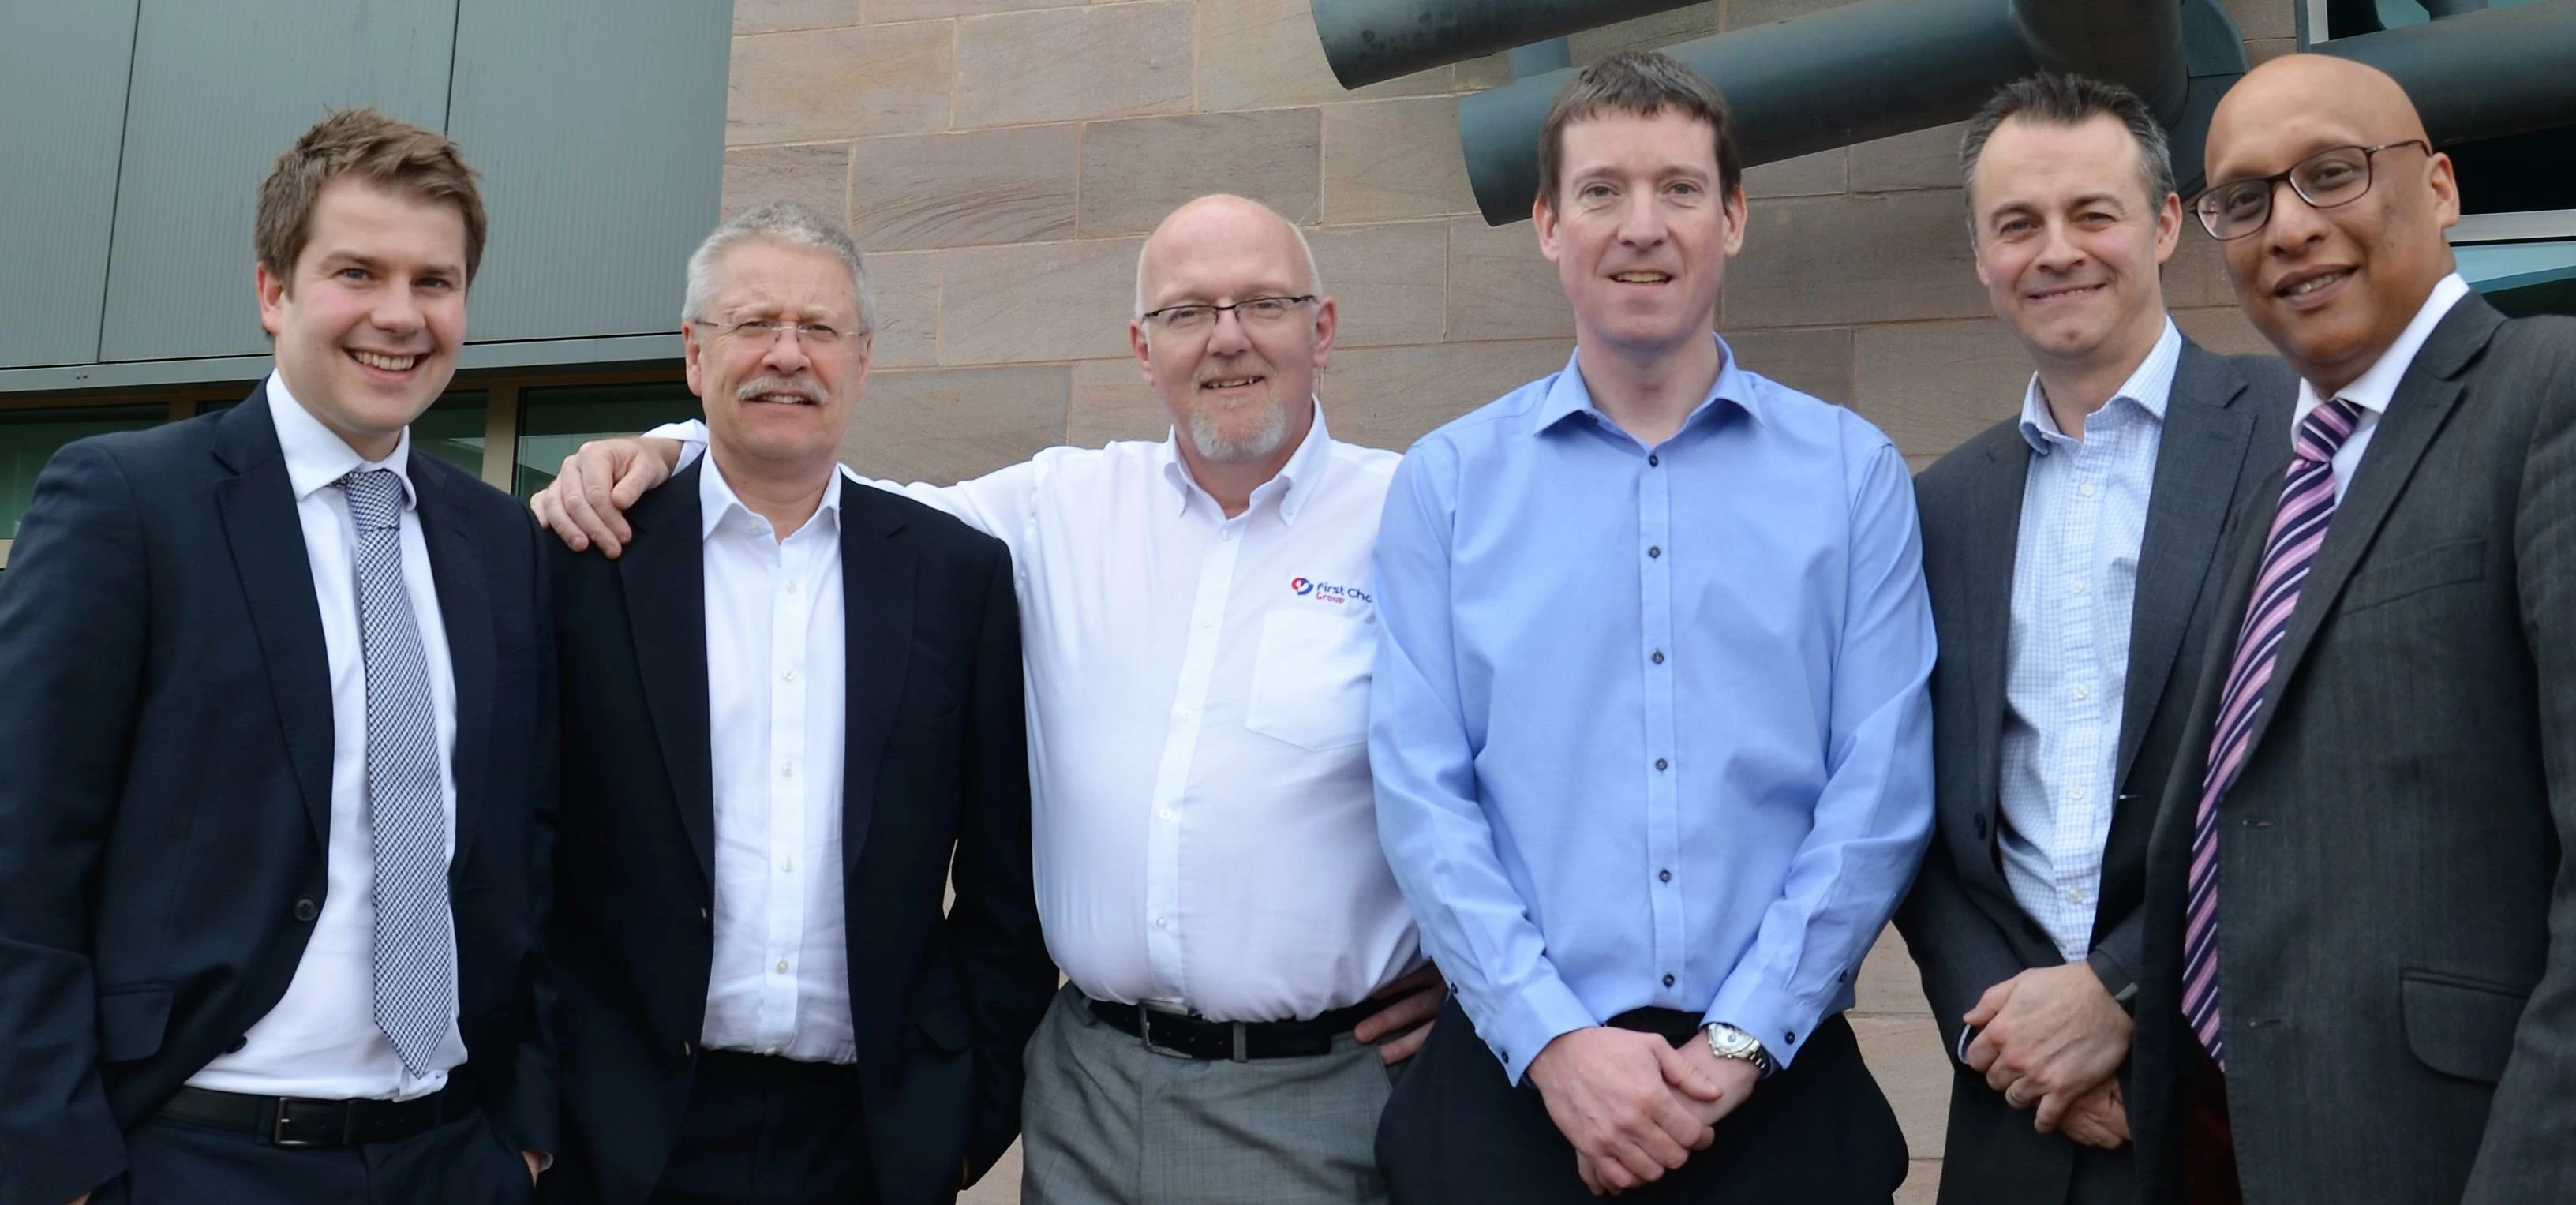 Pictured from left are: Jamie Partington of Higgs & Sons, Steve Robbins, John Whitehouse and Carl Ba